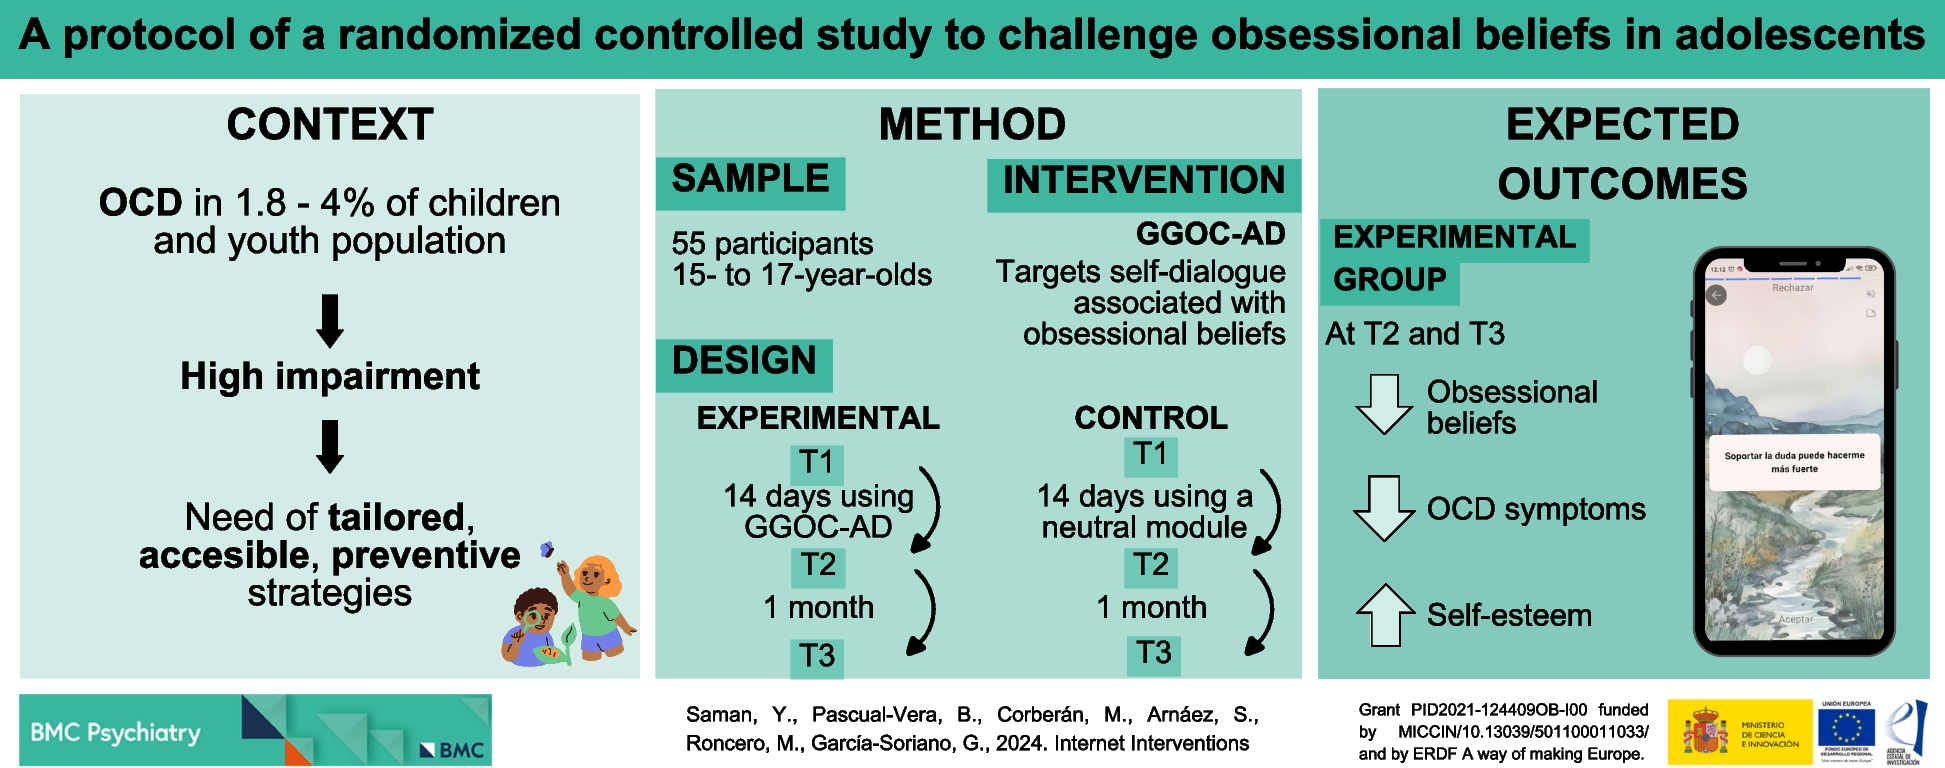 A mobile app to challenge obsessional beliefs in adolescents: a protocol of a two-armed, parallel randomized controlled trial